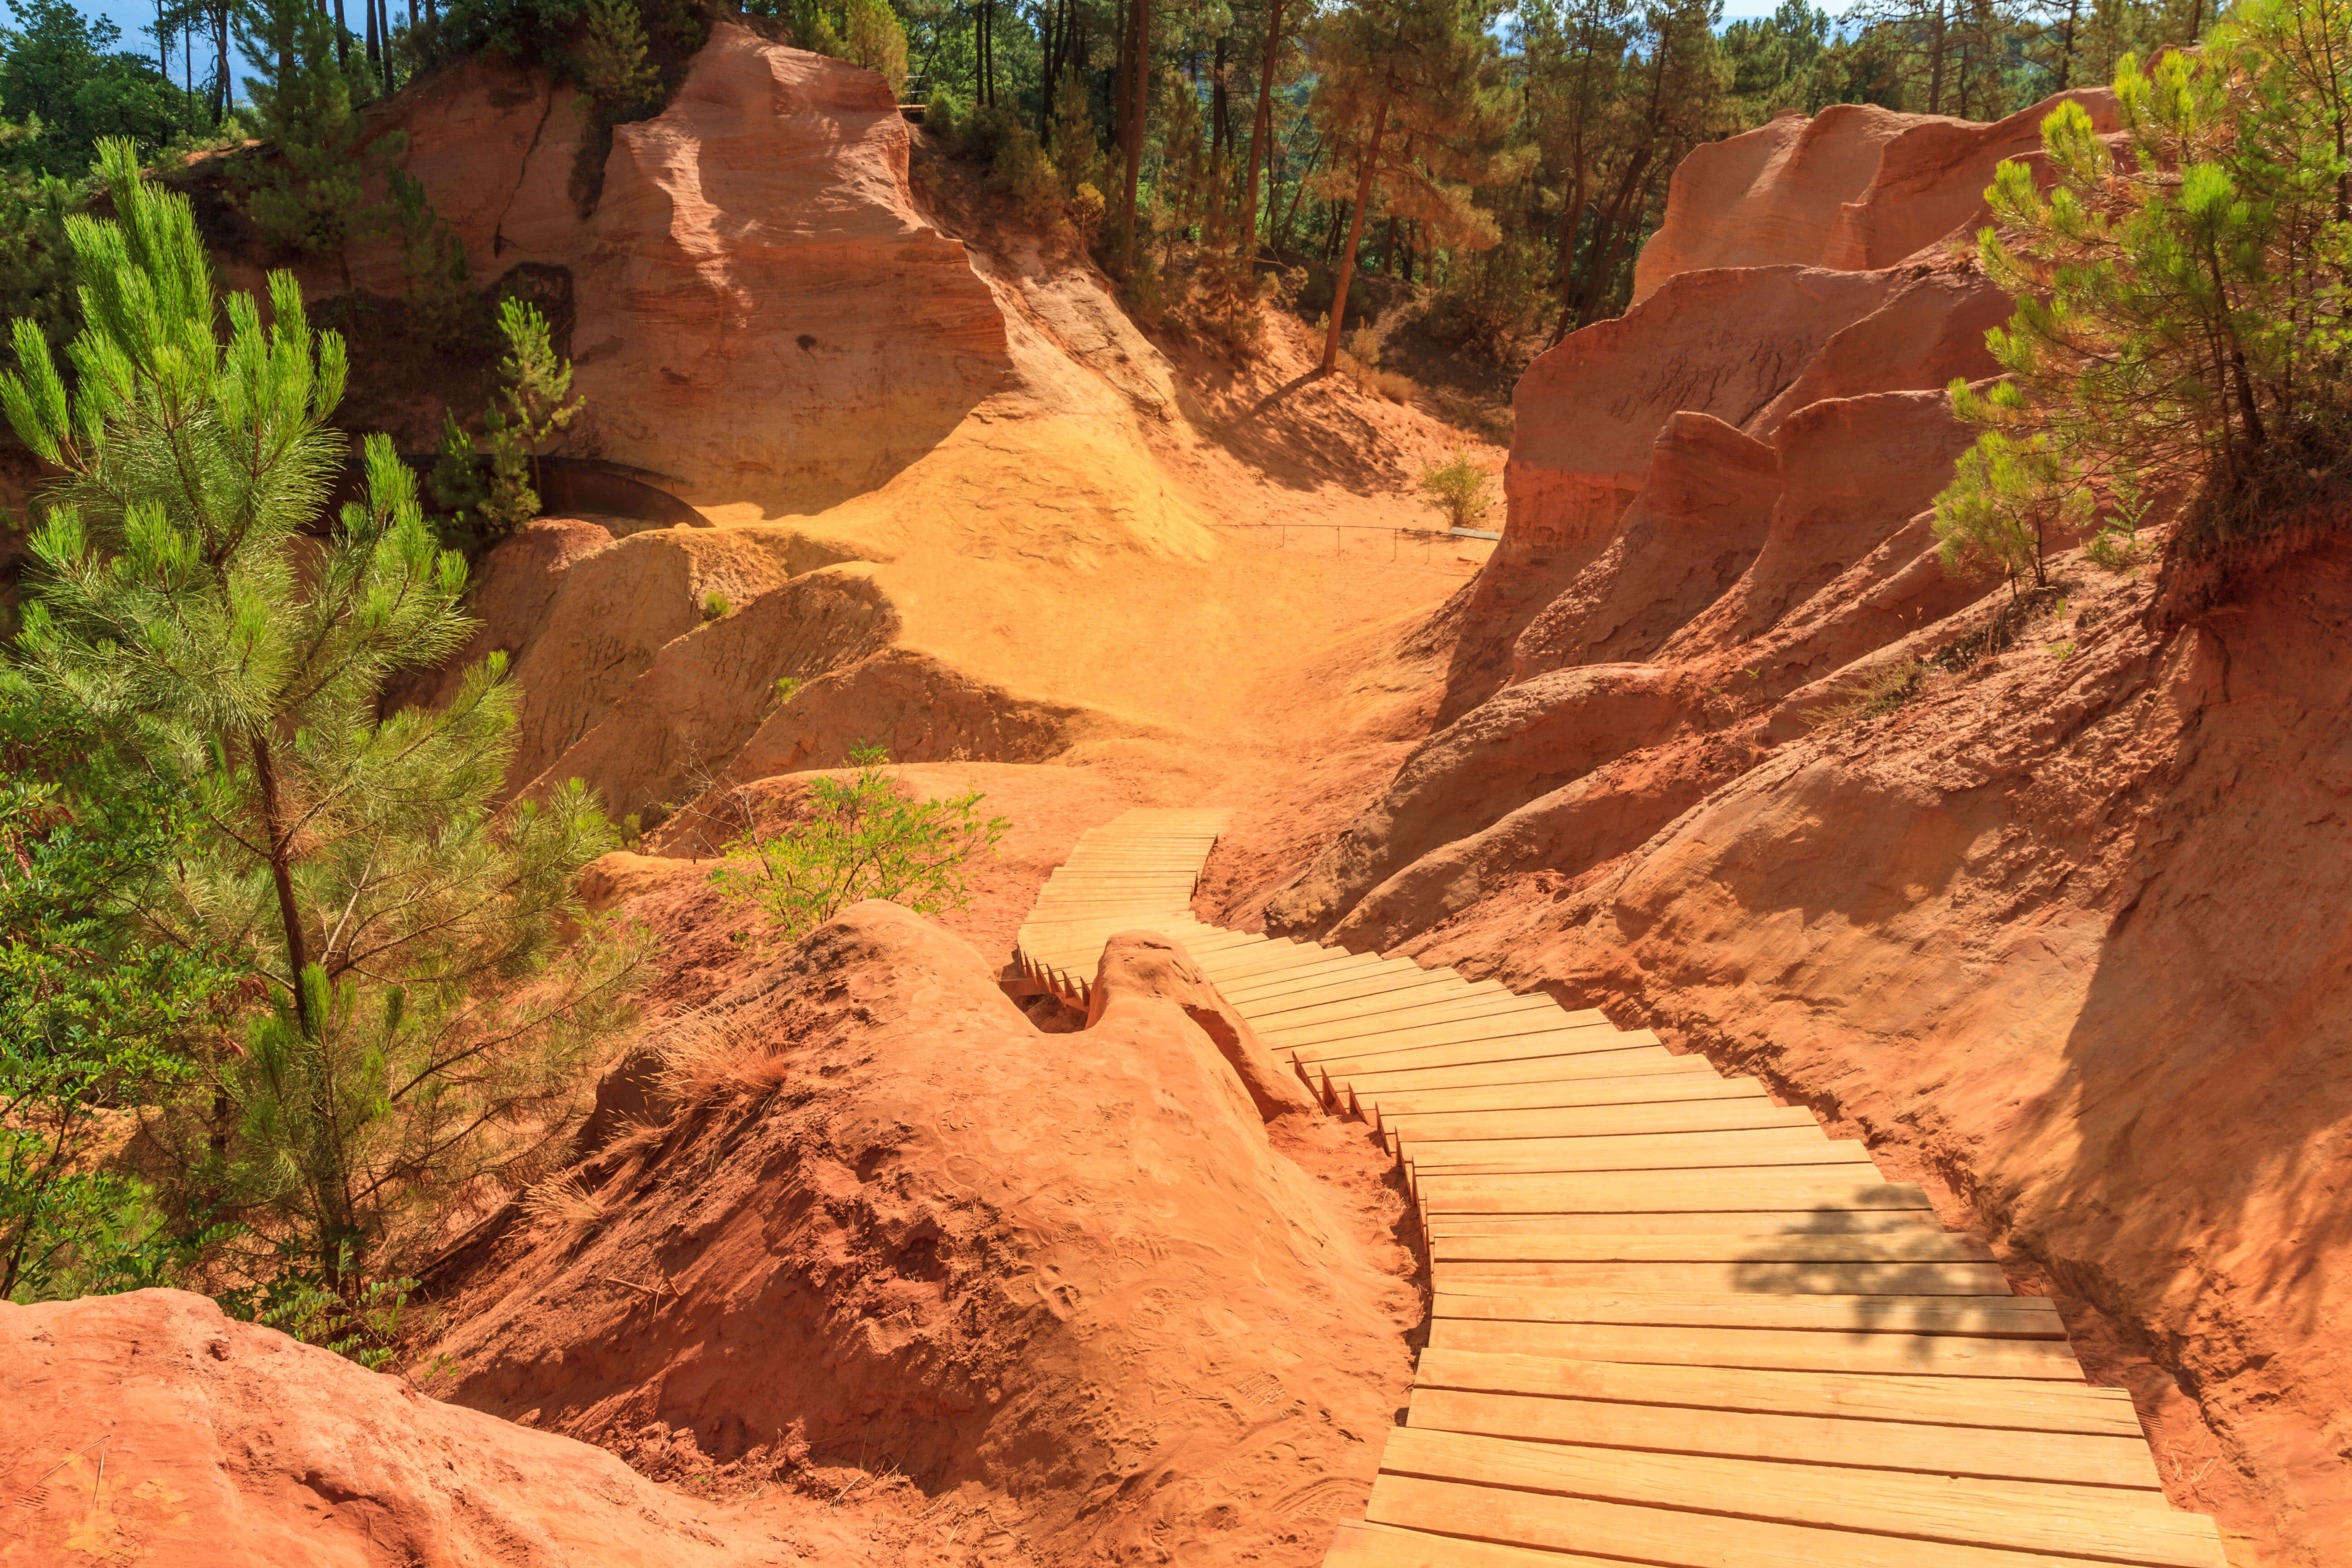 The Orche trail Roussillon in the Luberon in provence